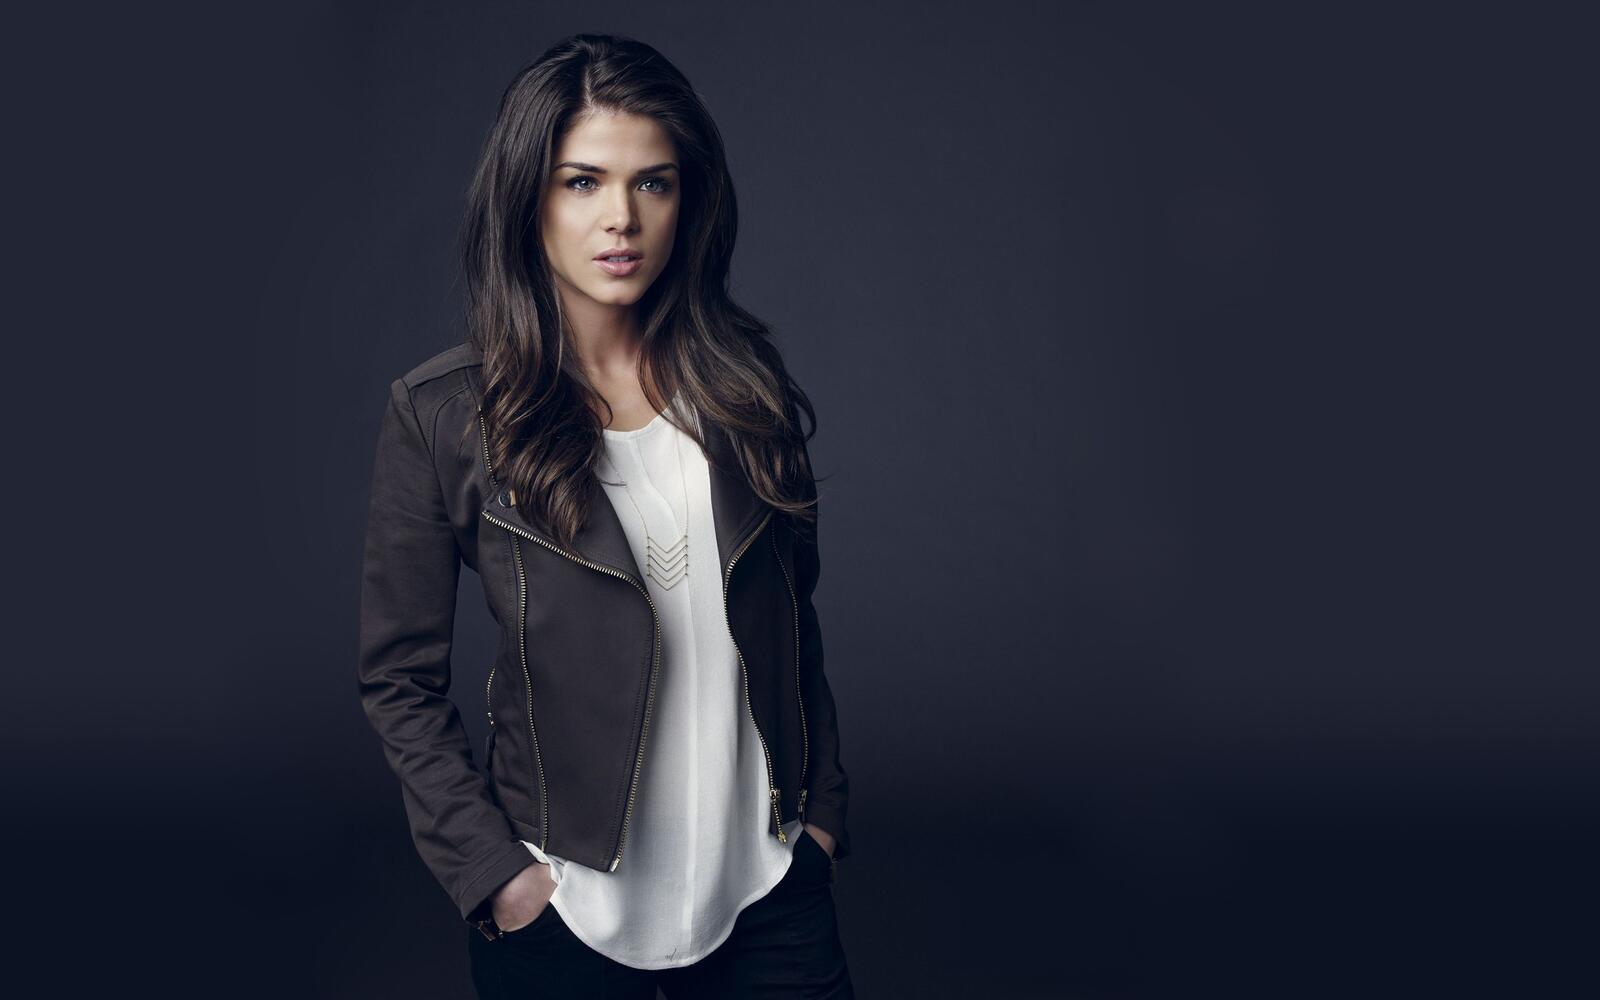 Wallpapers Marie Avgeropoulos celebrity girls on the desktop